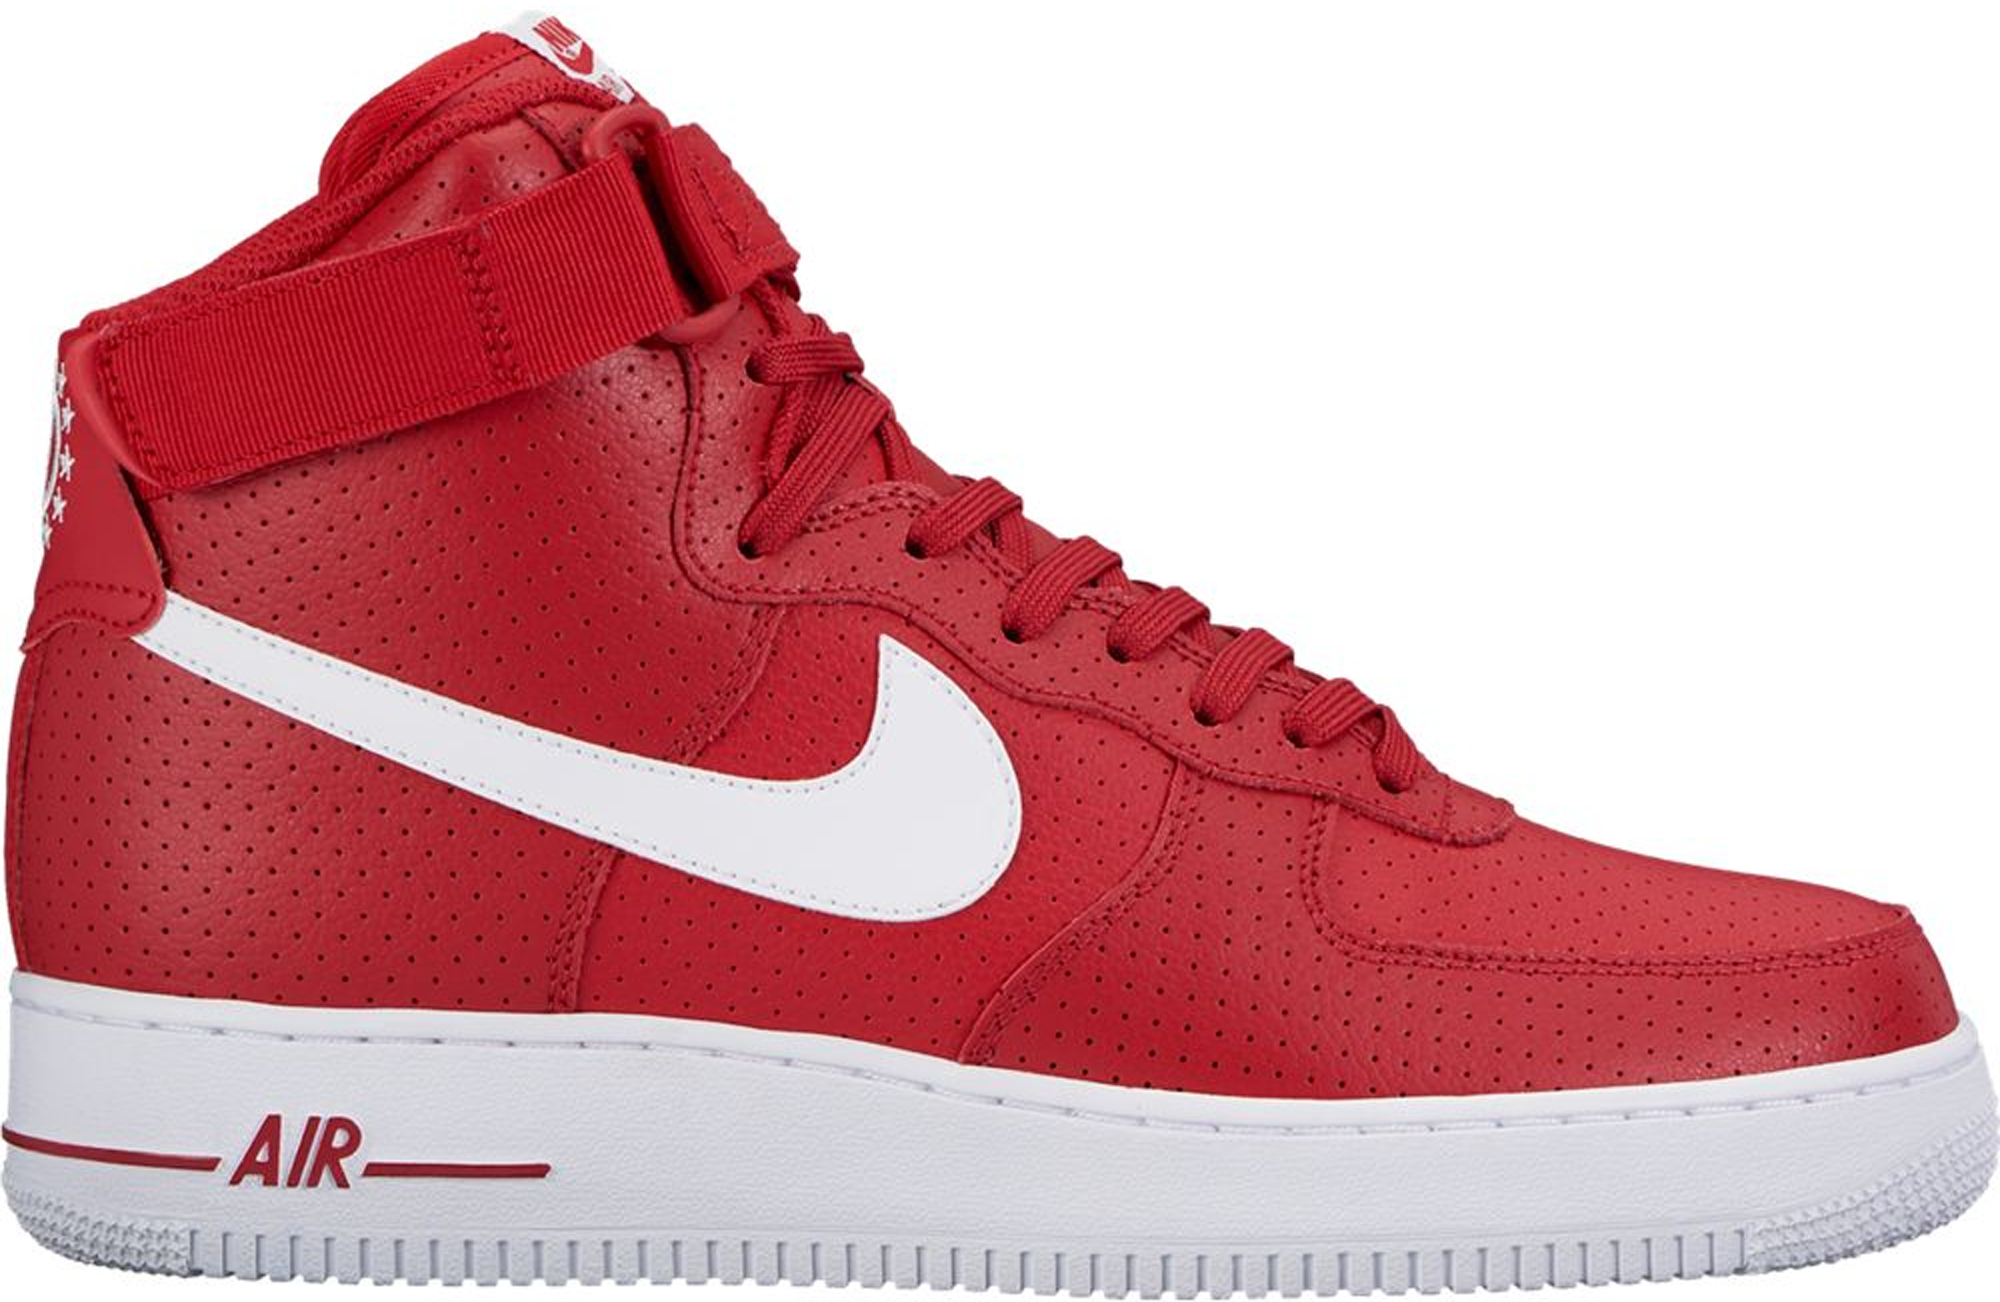 nike air force 1 red and black high